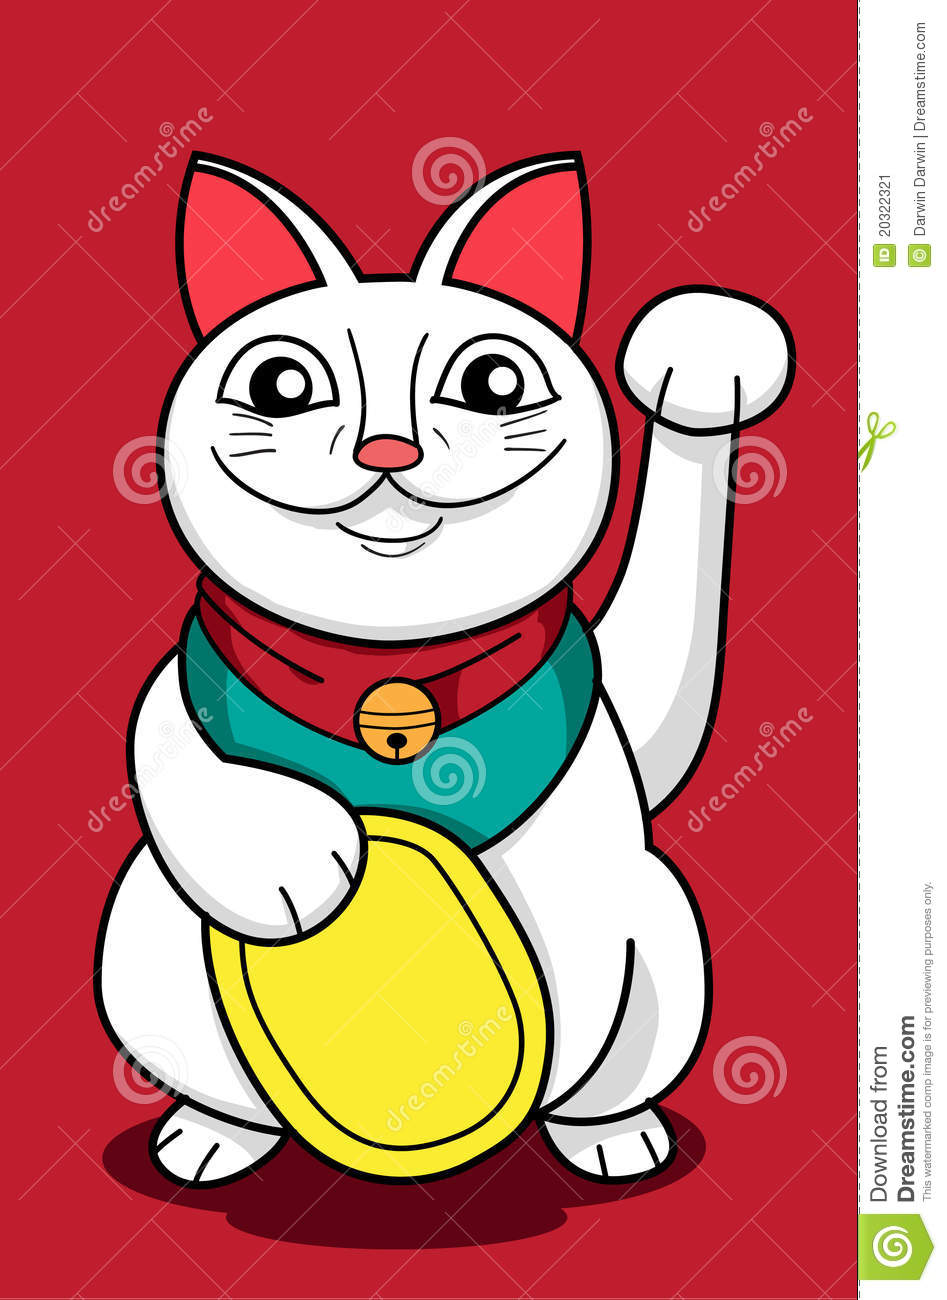 Lucky Cat Stock Image   Image  20322321